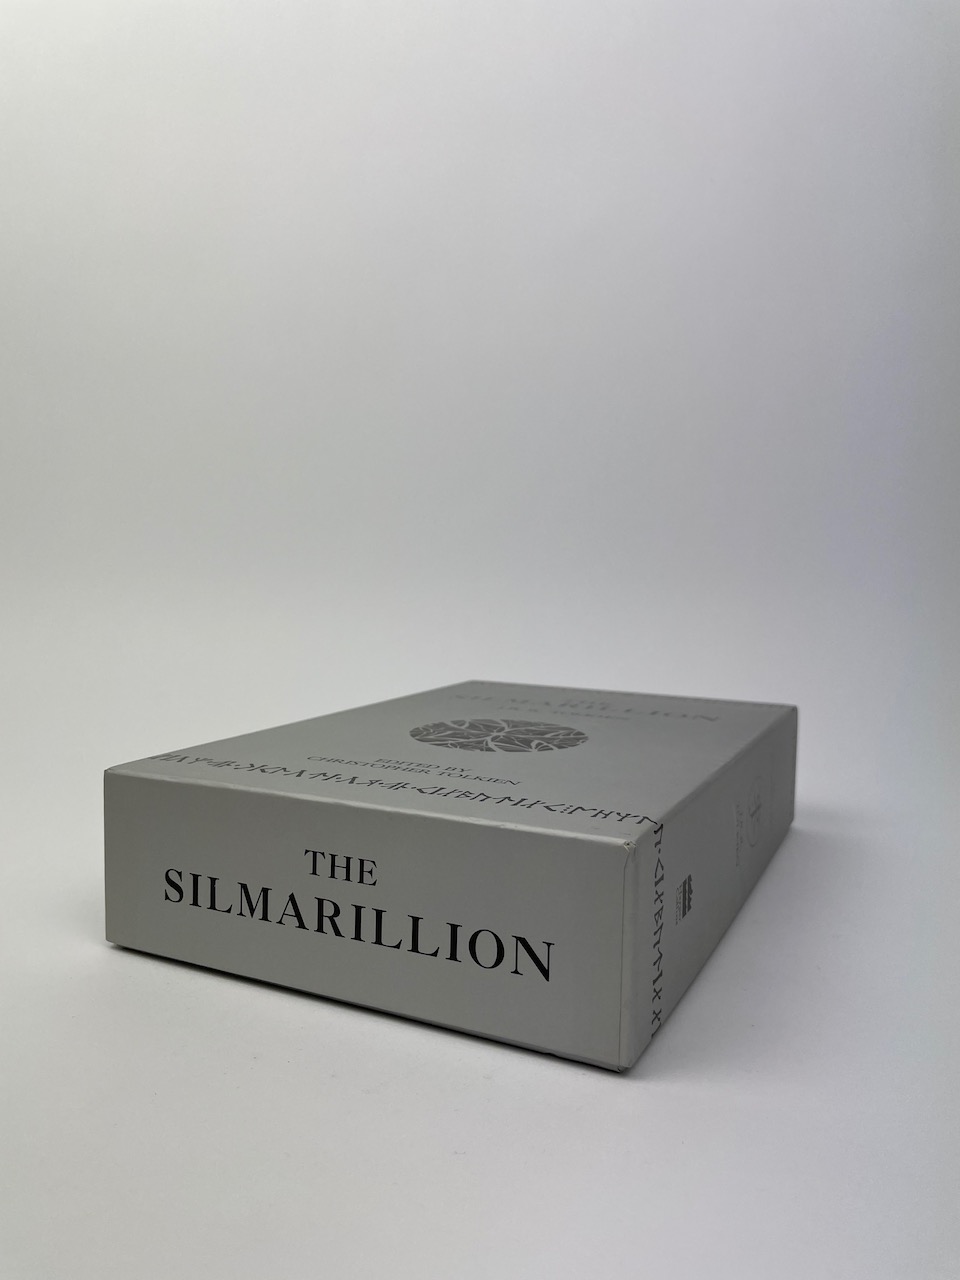 
The Silmarillion Limited Collector's Box 5